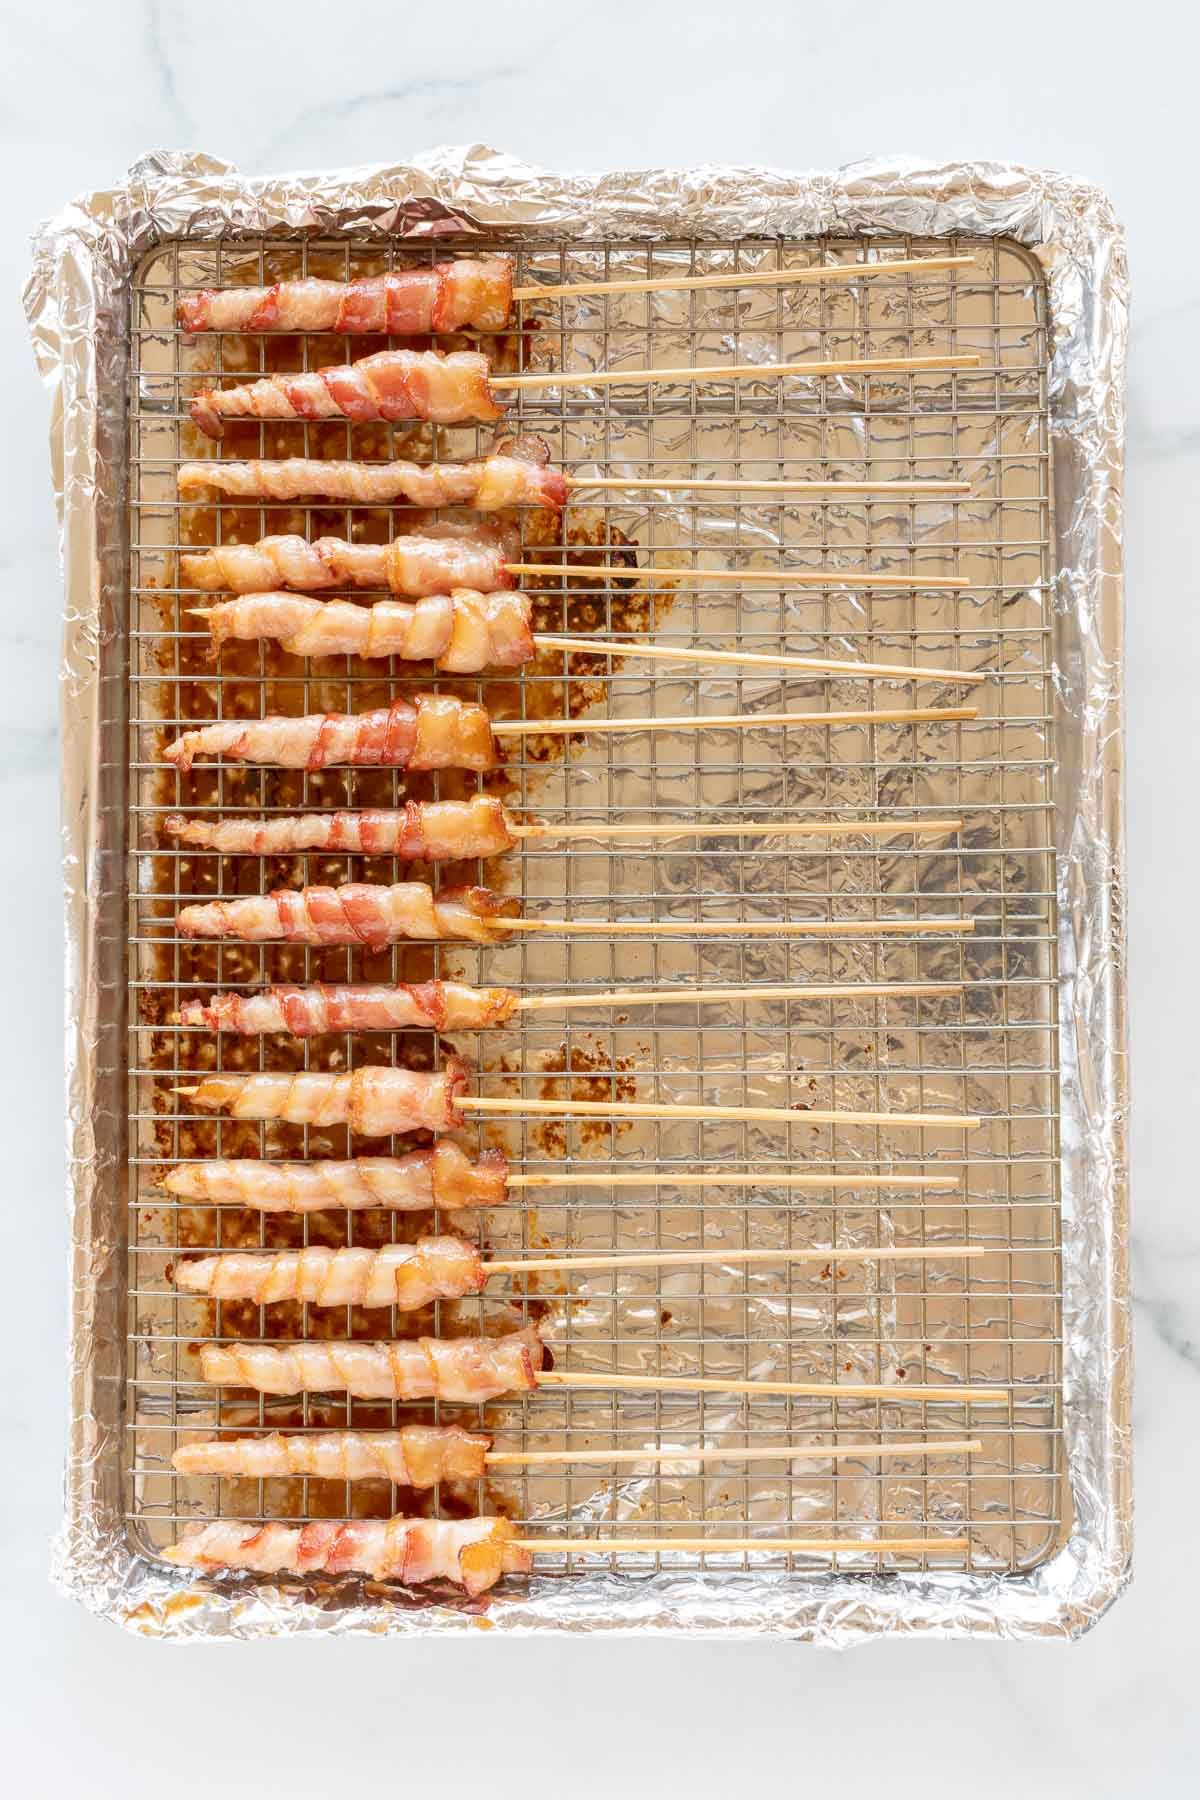 Caramel bacon on a skewer, laid out on a baking sheet